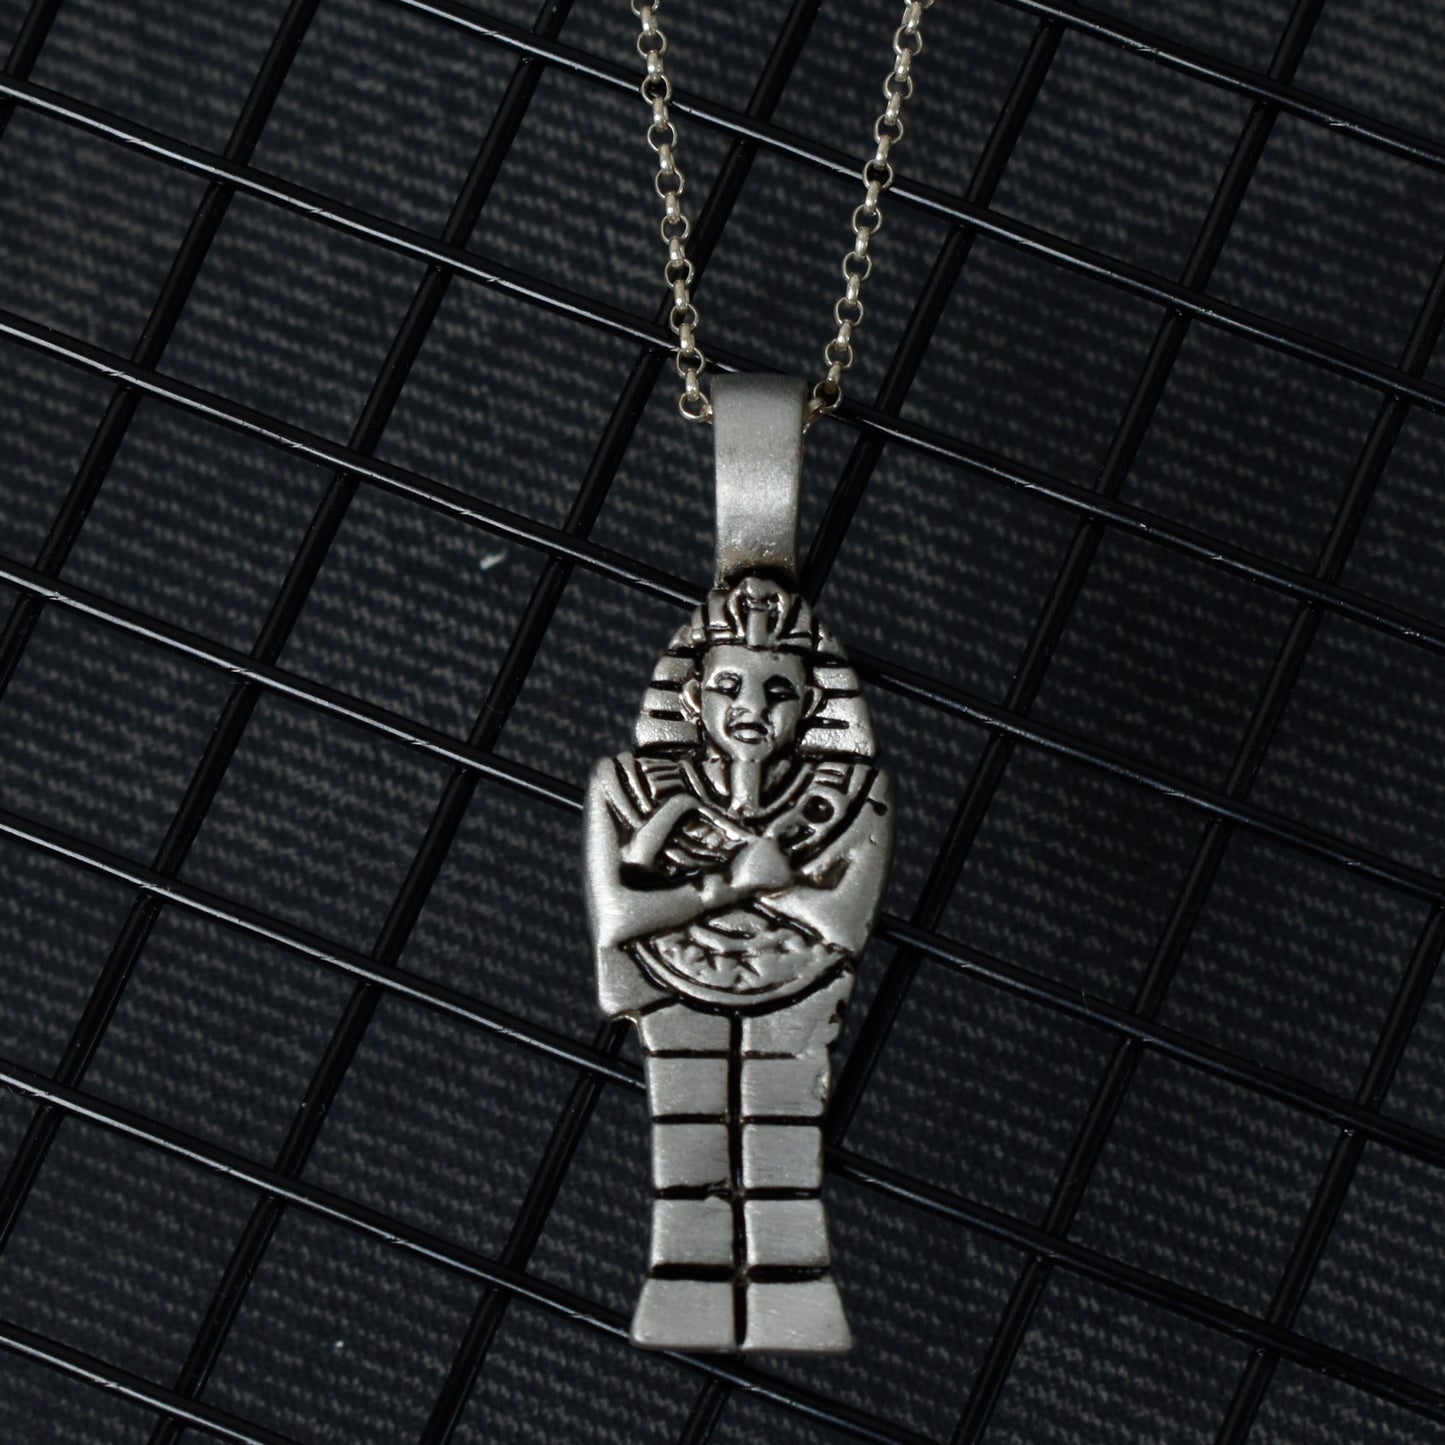 Egyptian Pharaoh King Silver Pewter Charm Necklace Pendant Jewelry